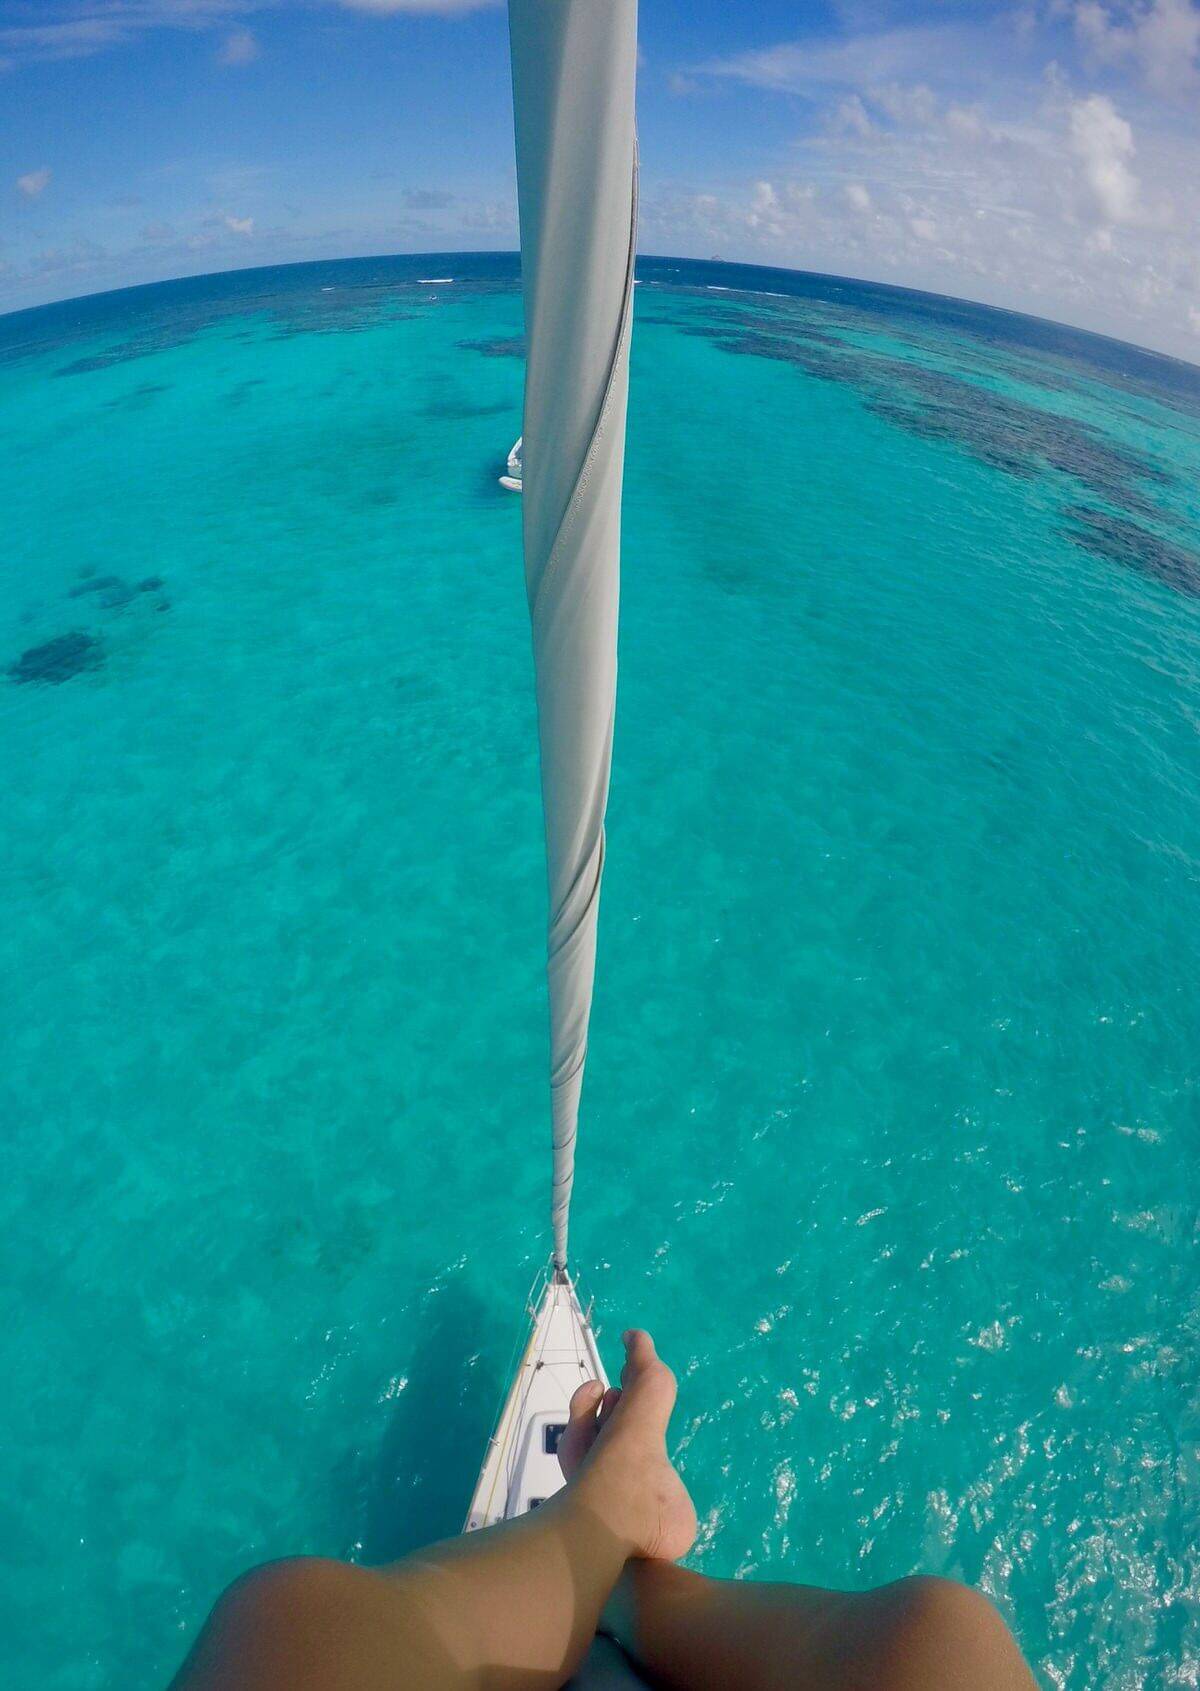 a person's feet on a sailboat in the ocean.